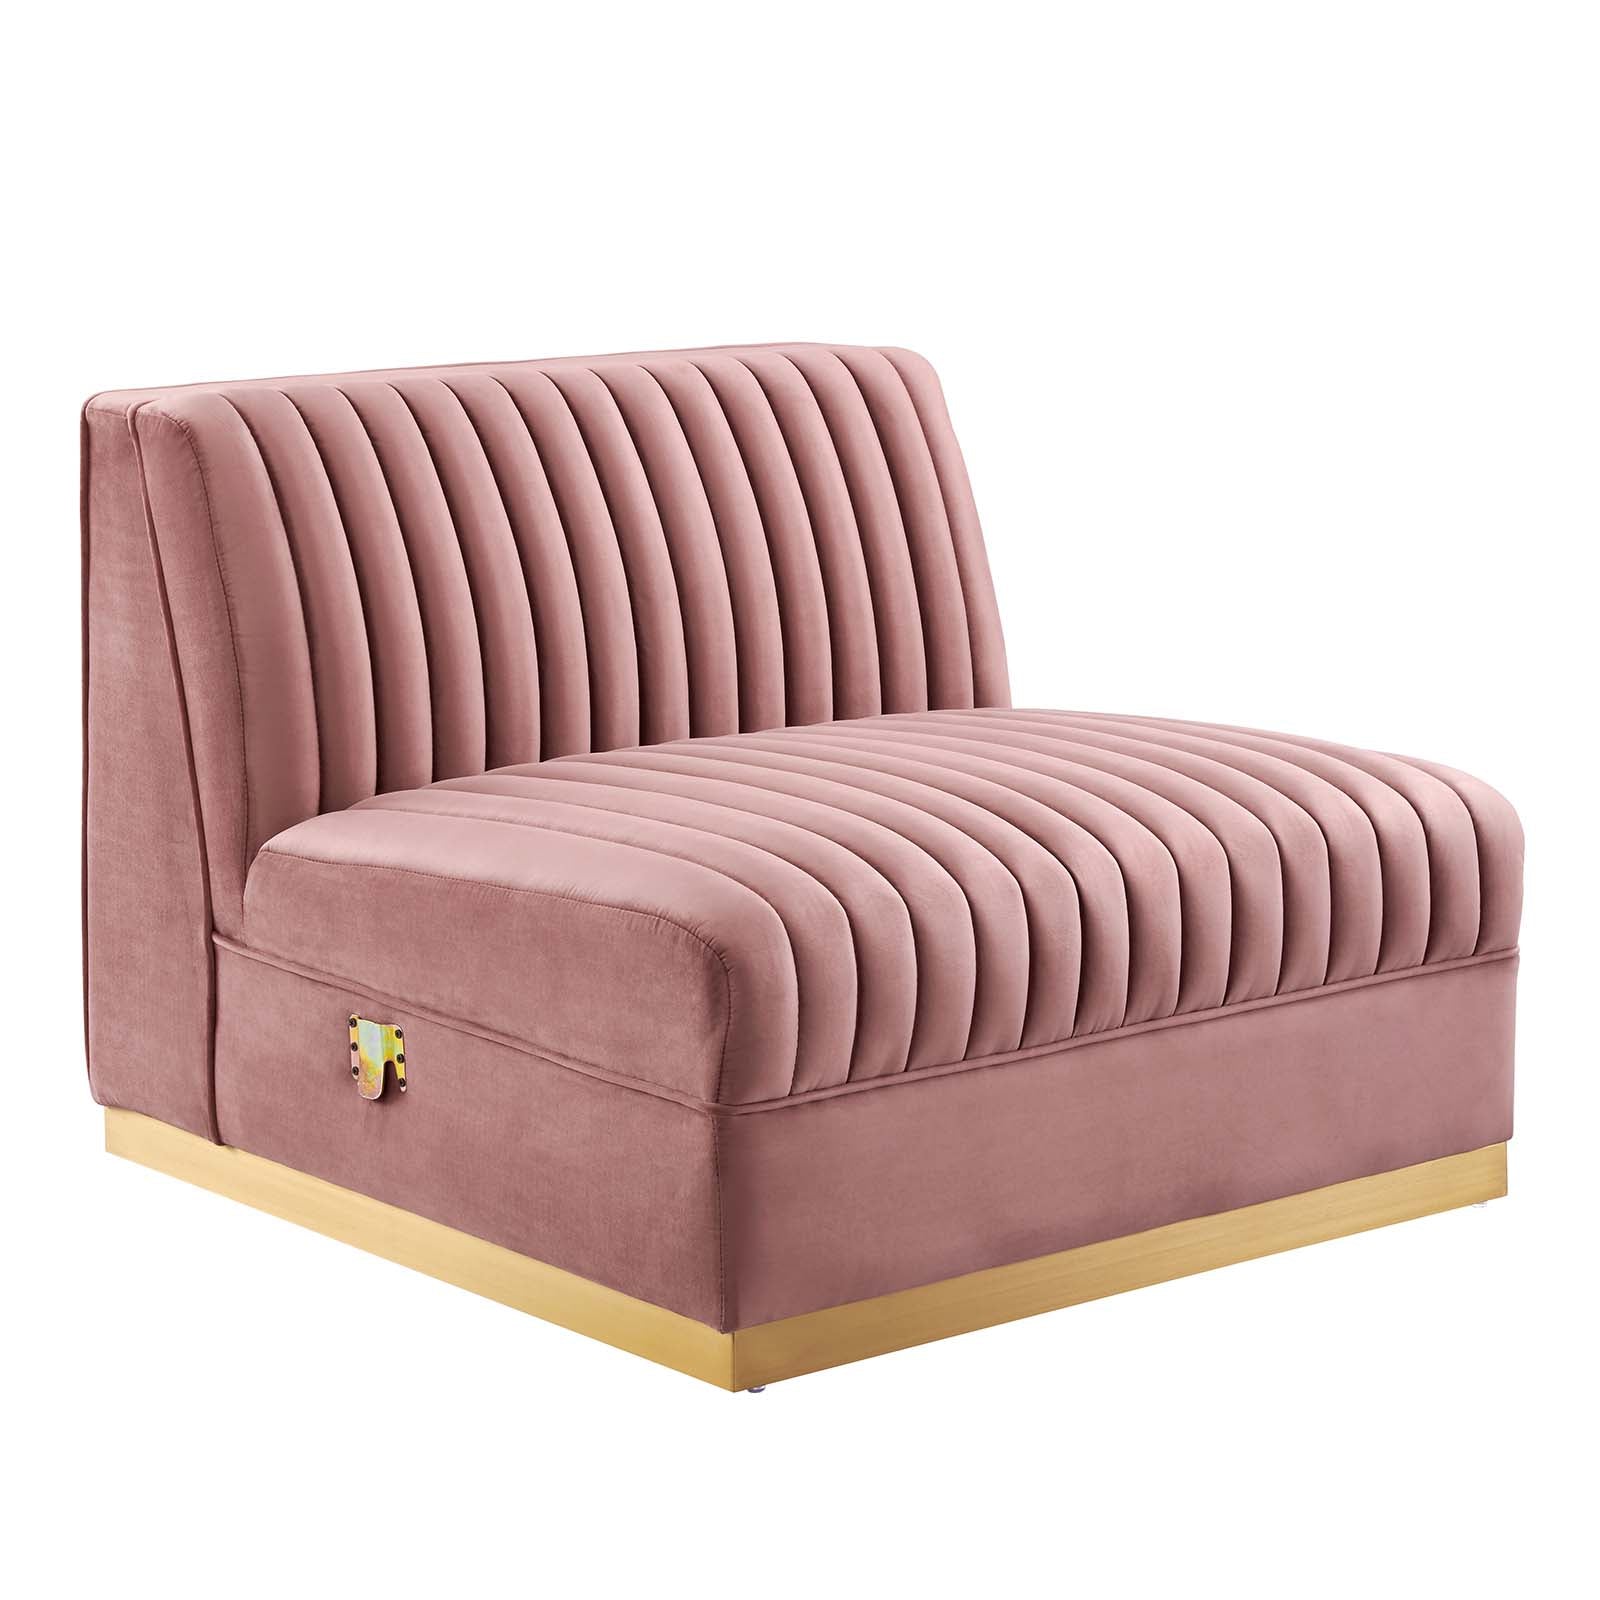 Modway Sectional Sofas - Sanguine Channel Tufted Performance Velvet 4 Piece Right-Facing Modular Sectional Sofa Dusty Rose